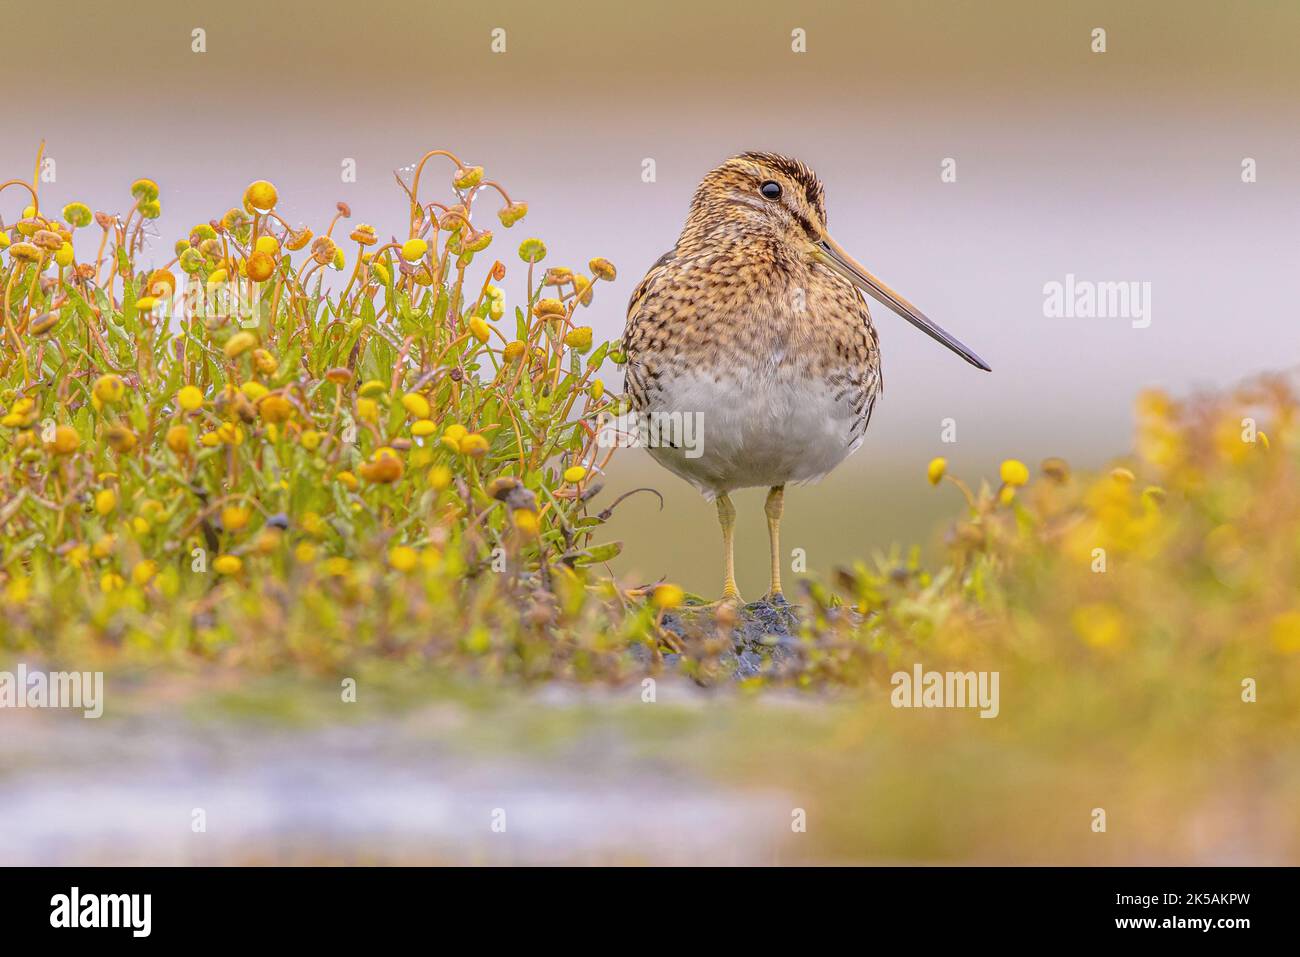 Common snipe (Gallinago gallinago) is a small, stocky wader bird native to the Old World. Breeding habitats are marshes, bogs, tundra and wet meadows Stock Photo